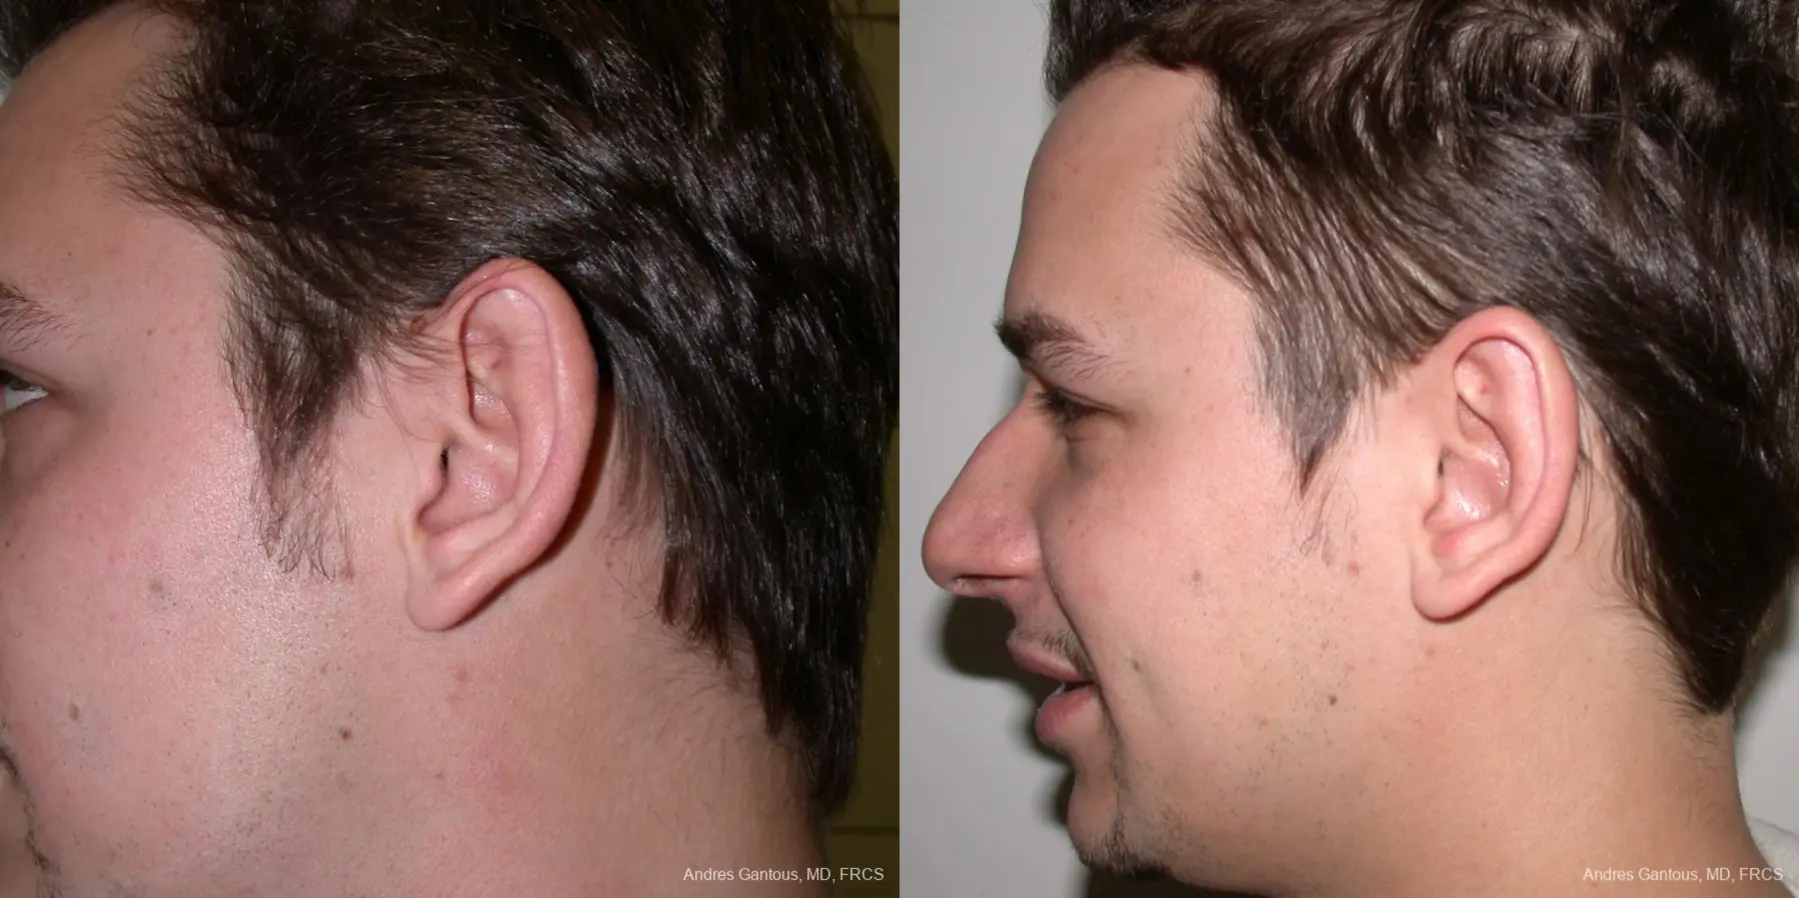 Otoplasty And Earlobe Repair: Patient 1 - Before and After 3